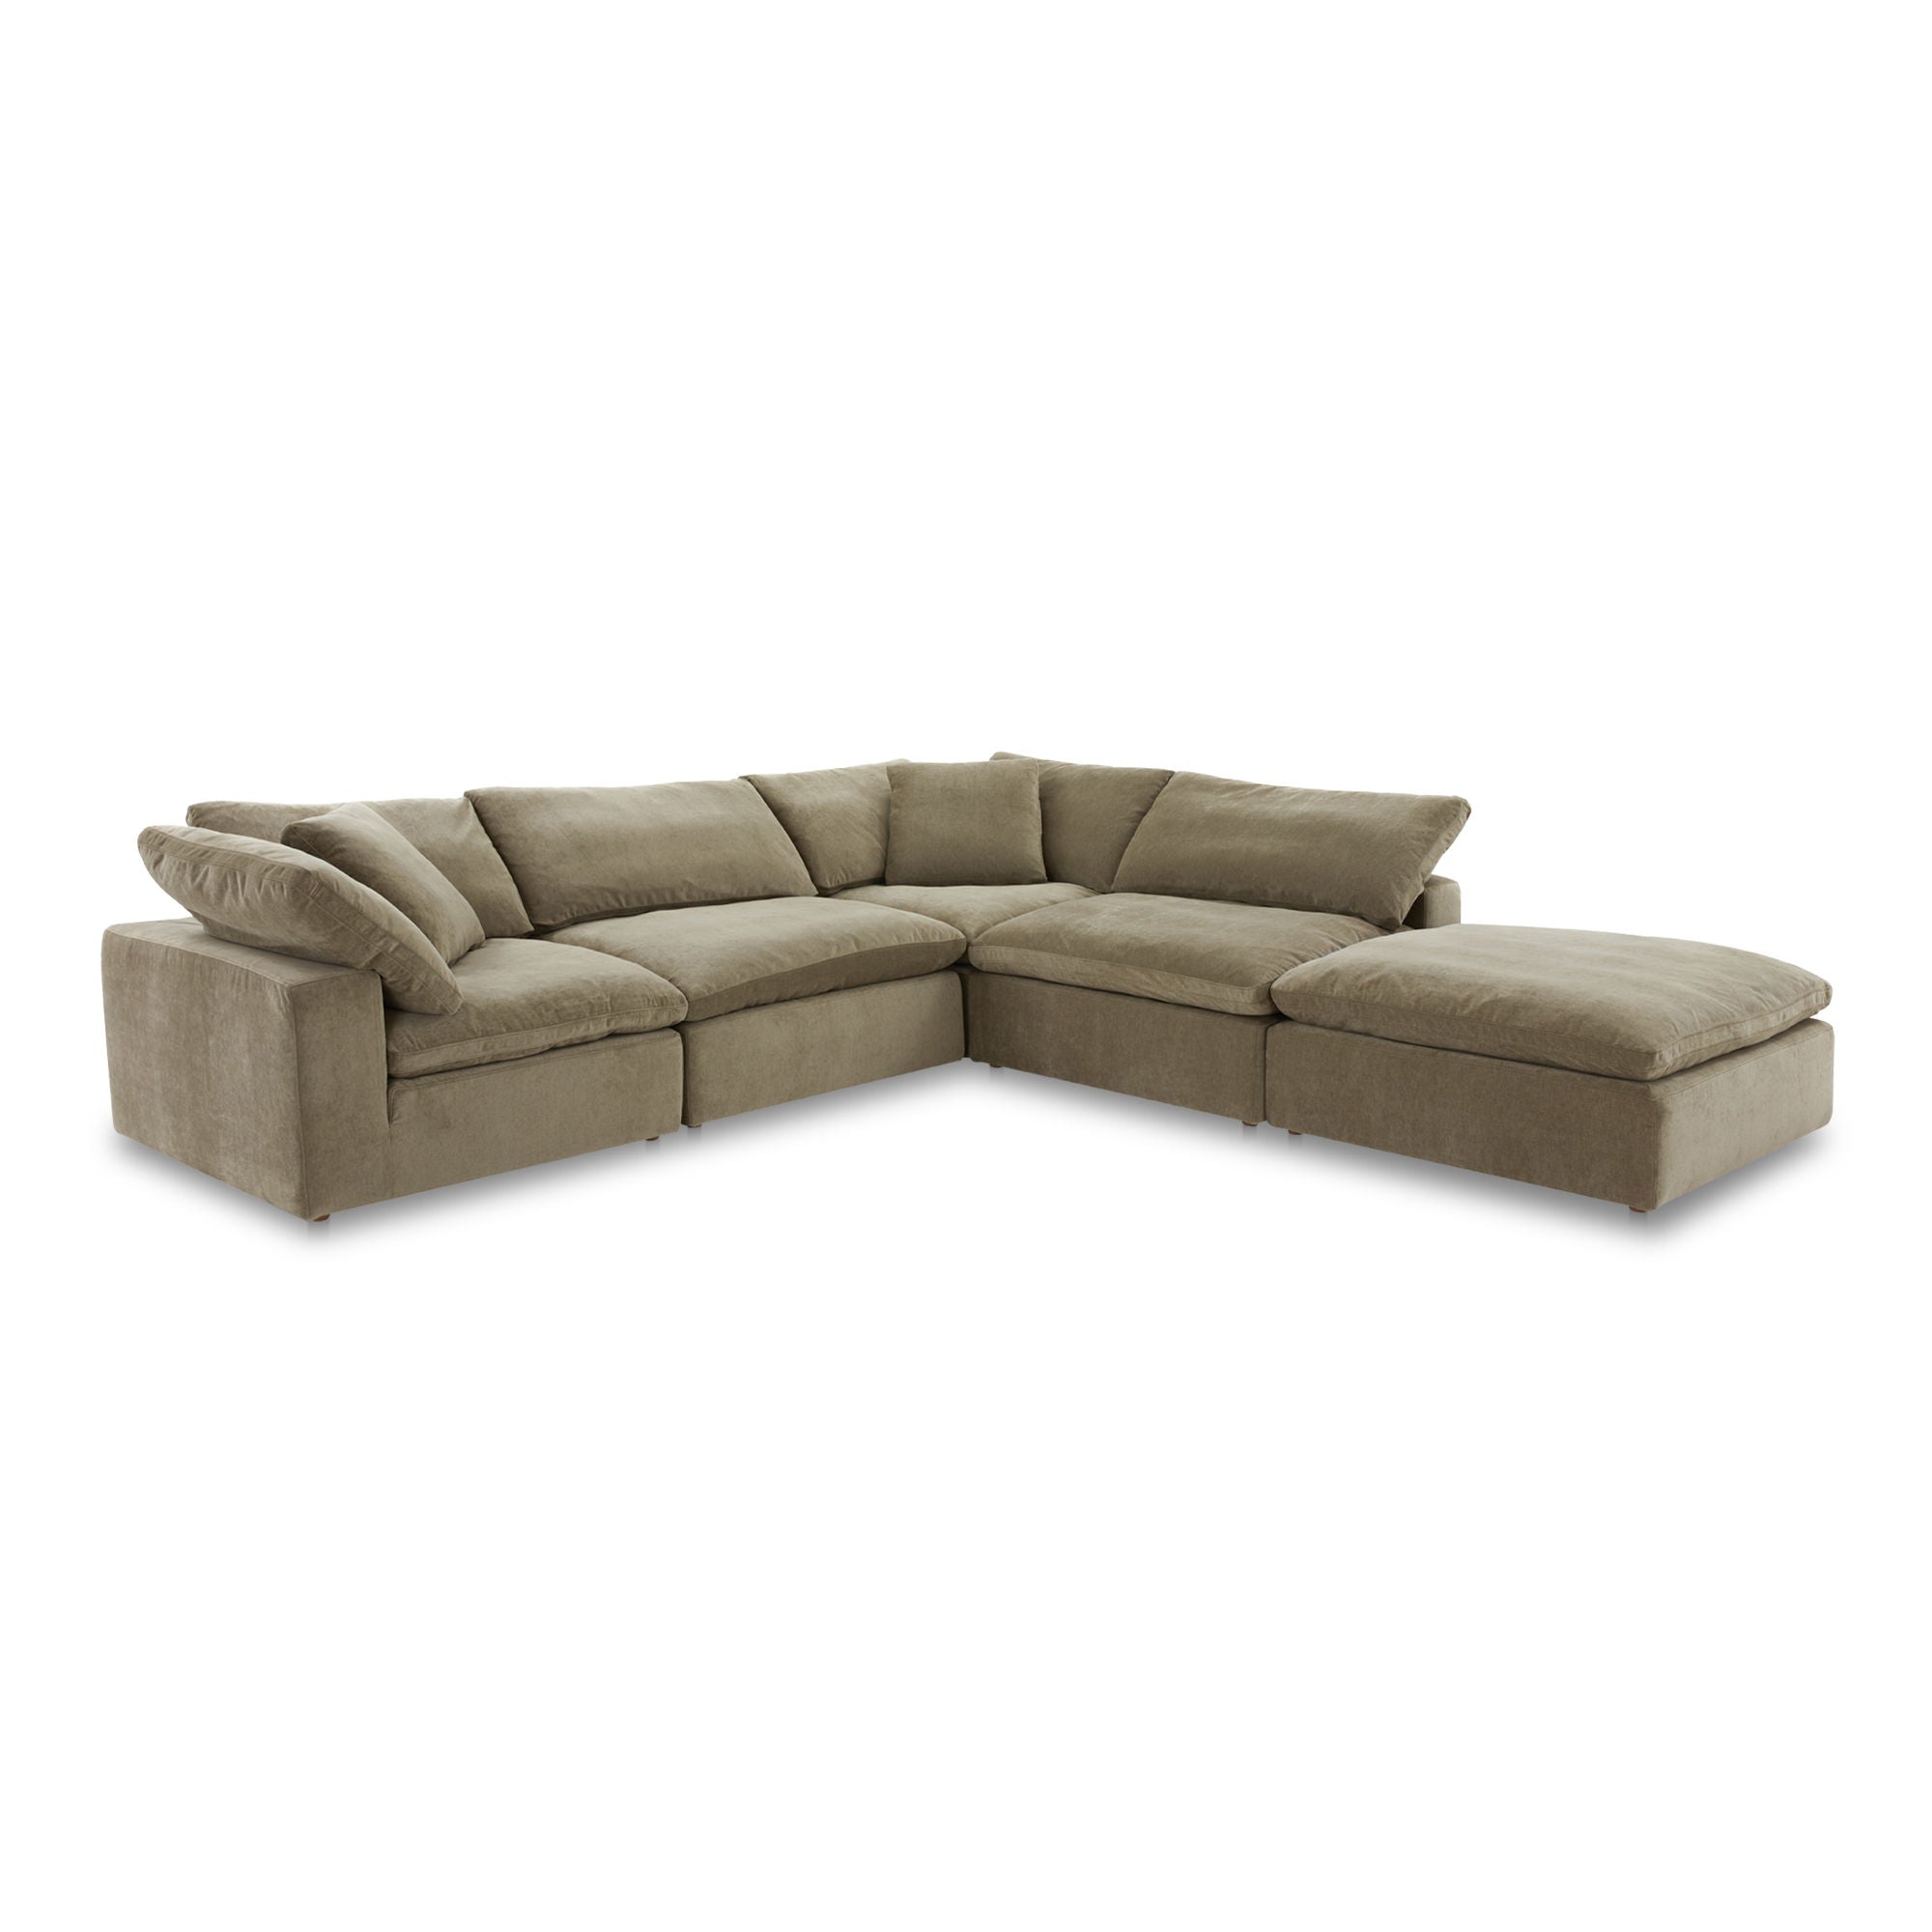 Clay Dream - Modular Sectional Performance - Desert Sage-Stationary Sectionals-American Furniture Outlet